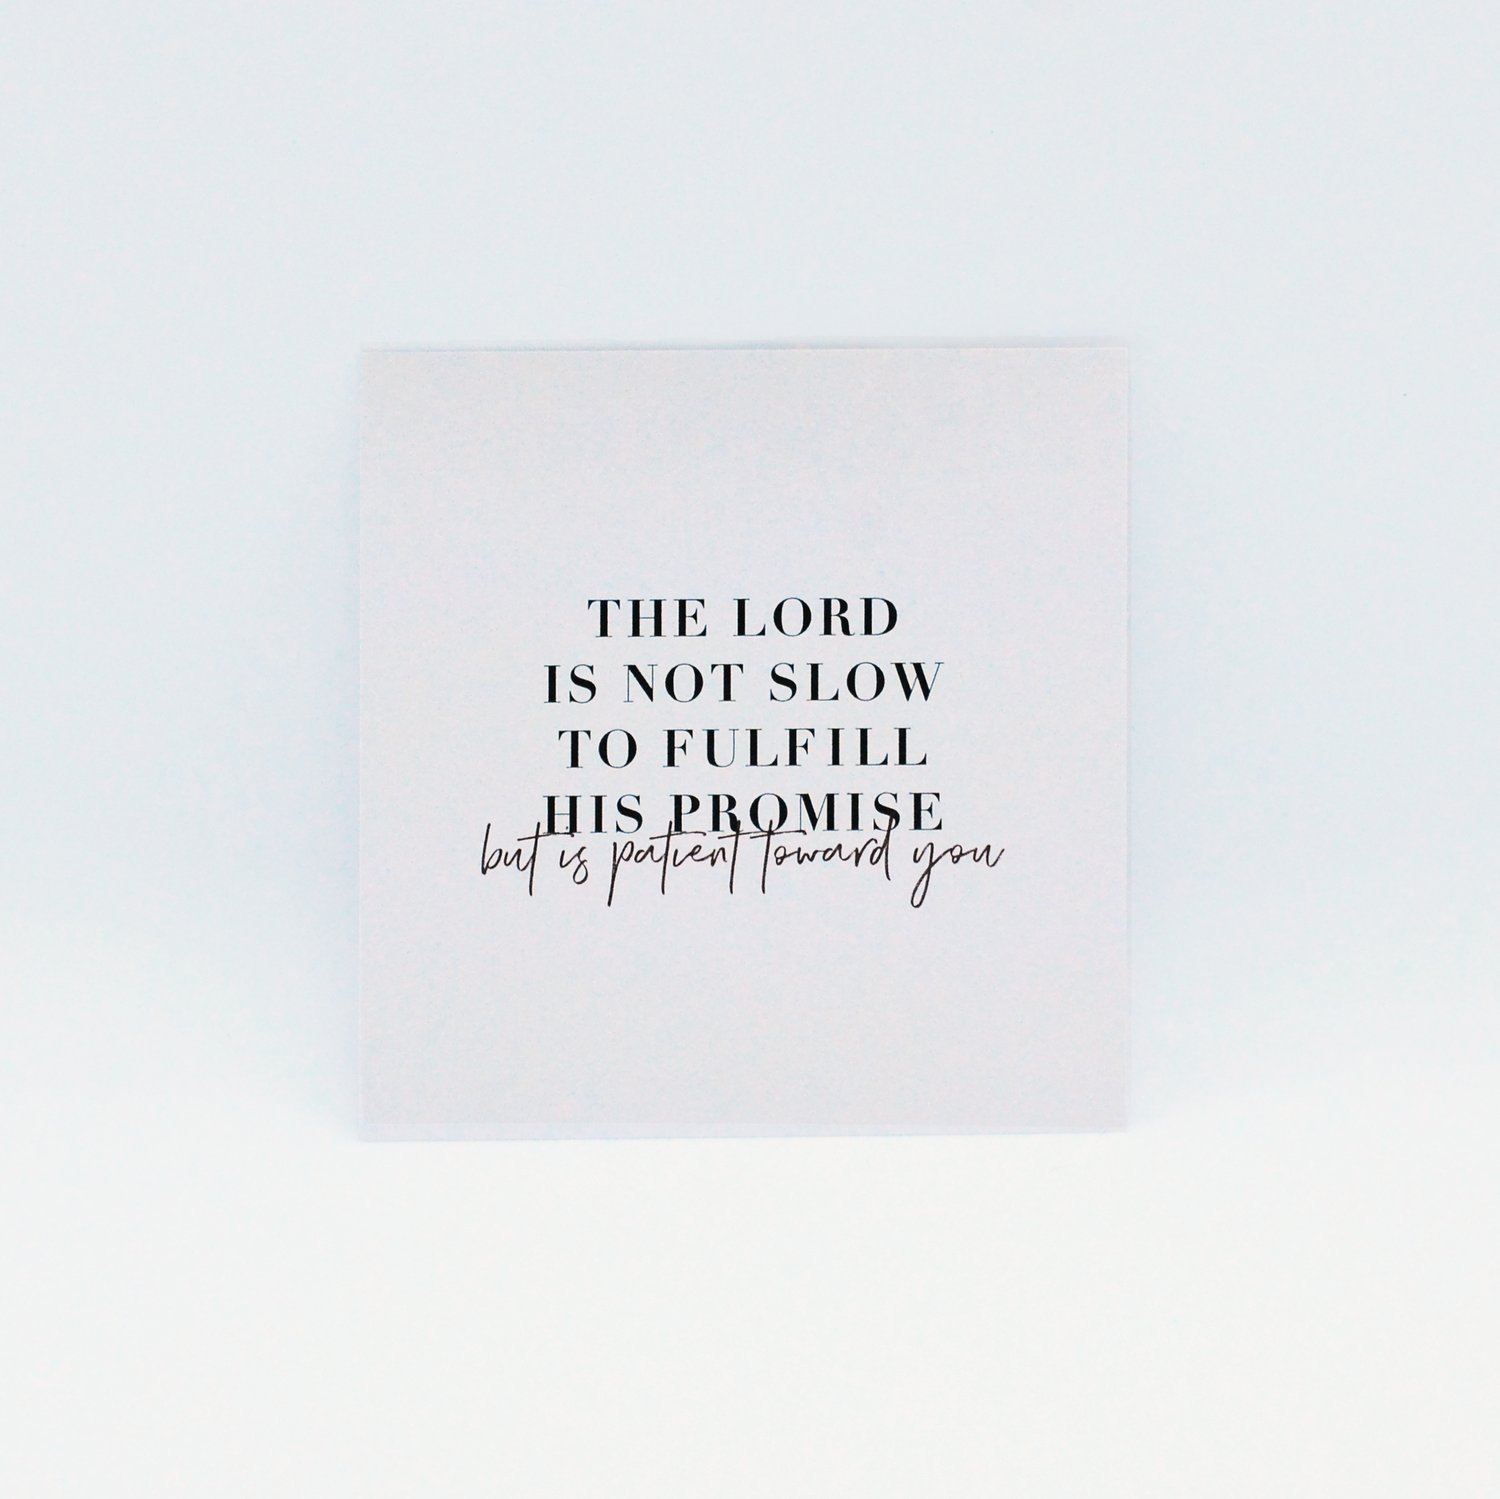 Image of The Lord is not slow to fulfill His promise